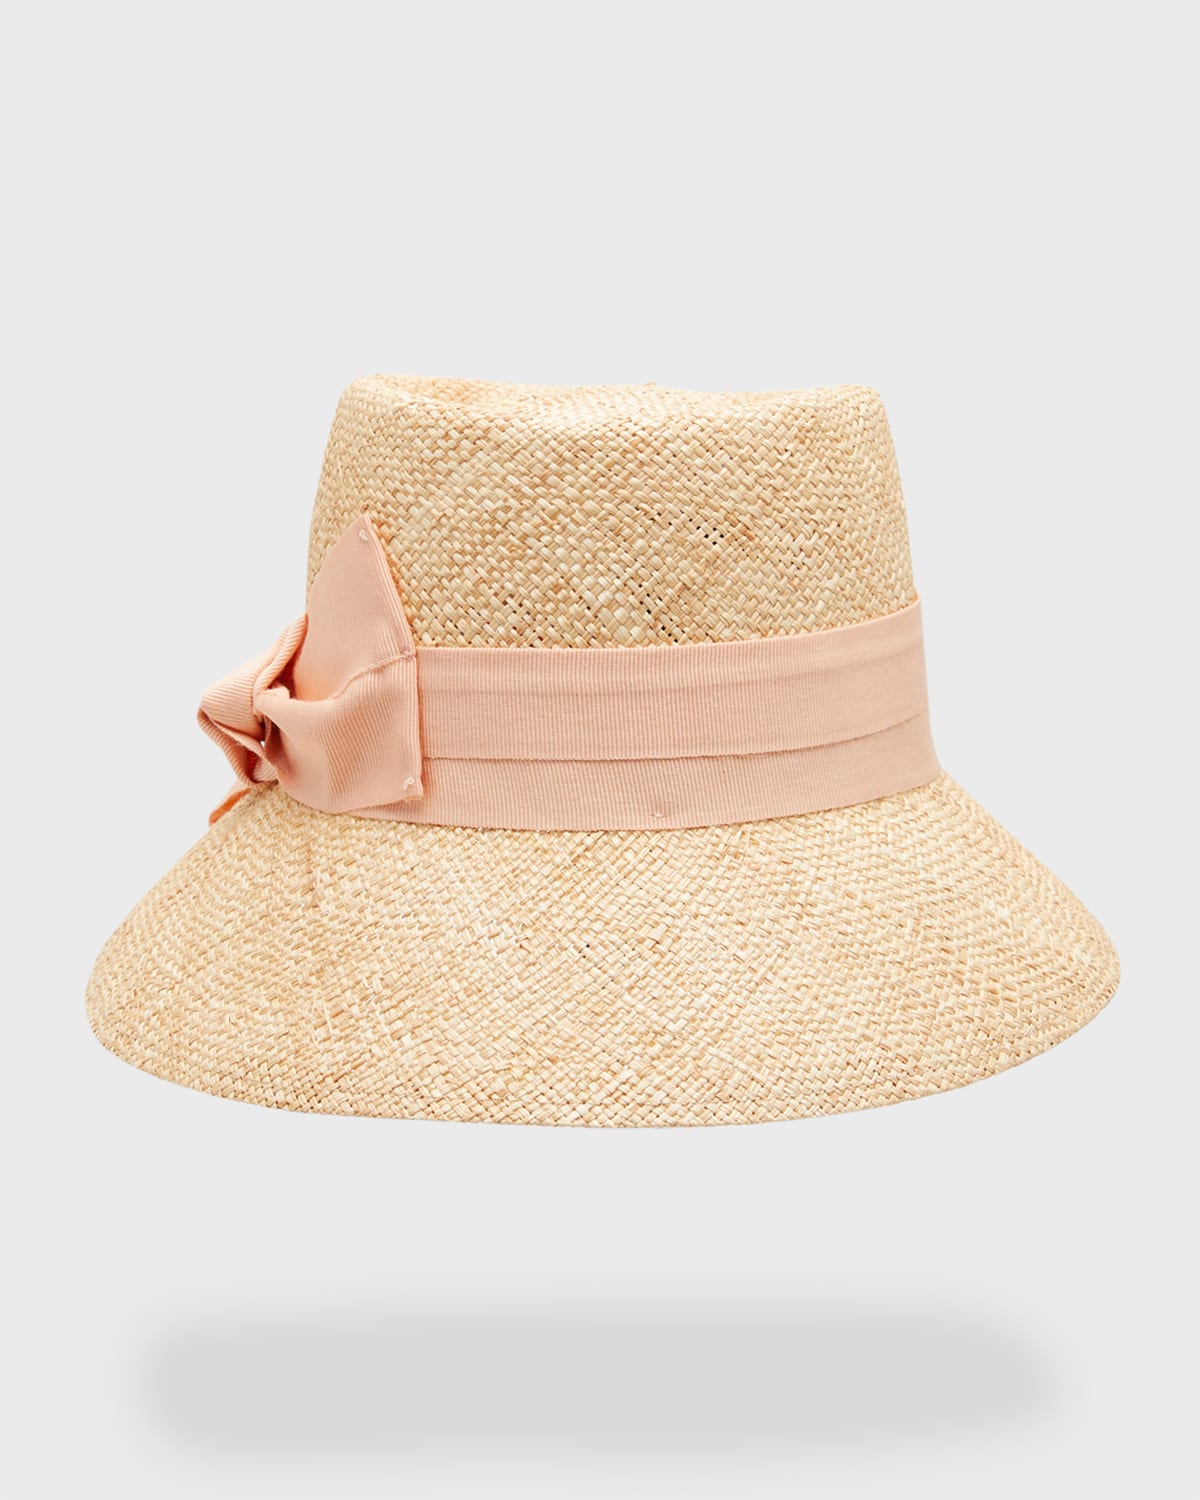 Hope Straw Bucket Hat With Bow Band